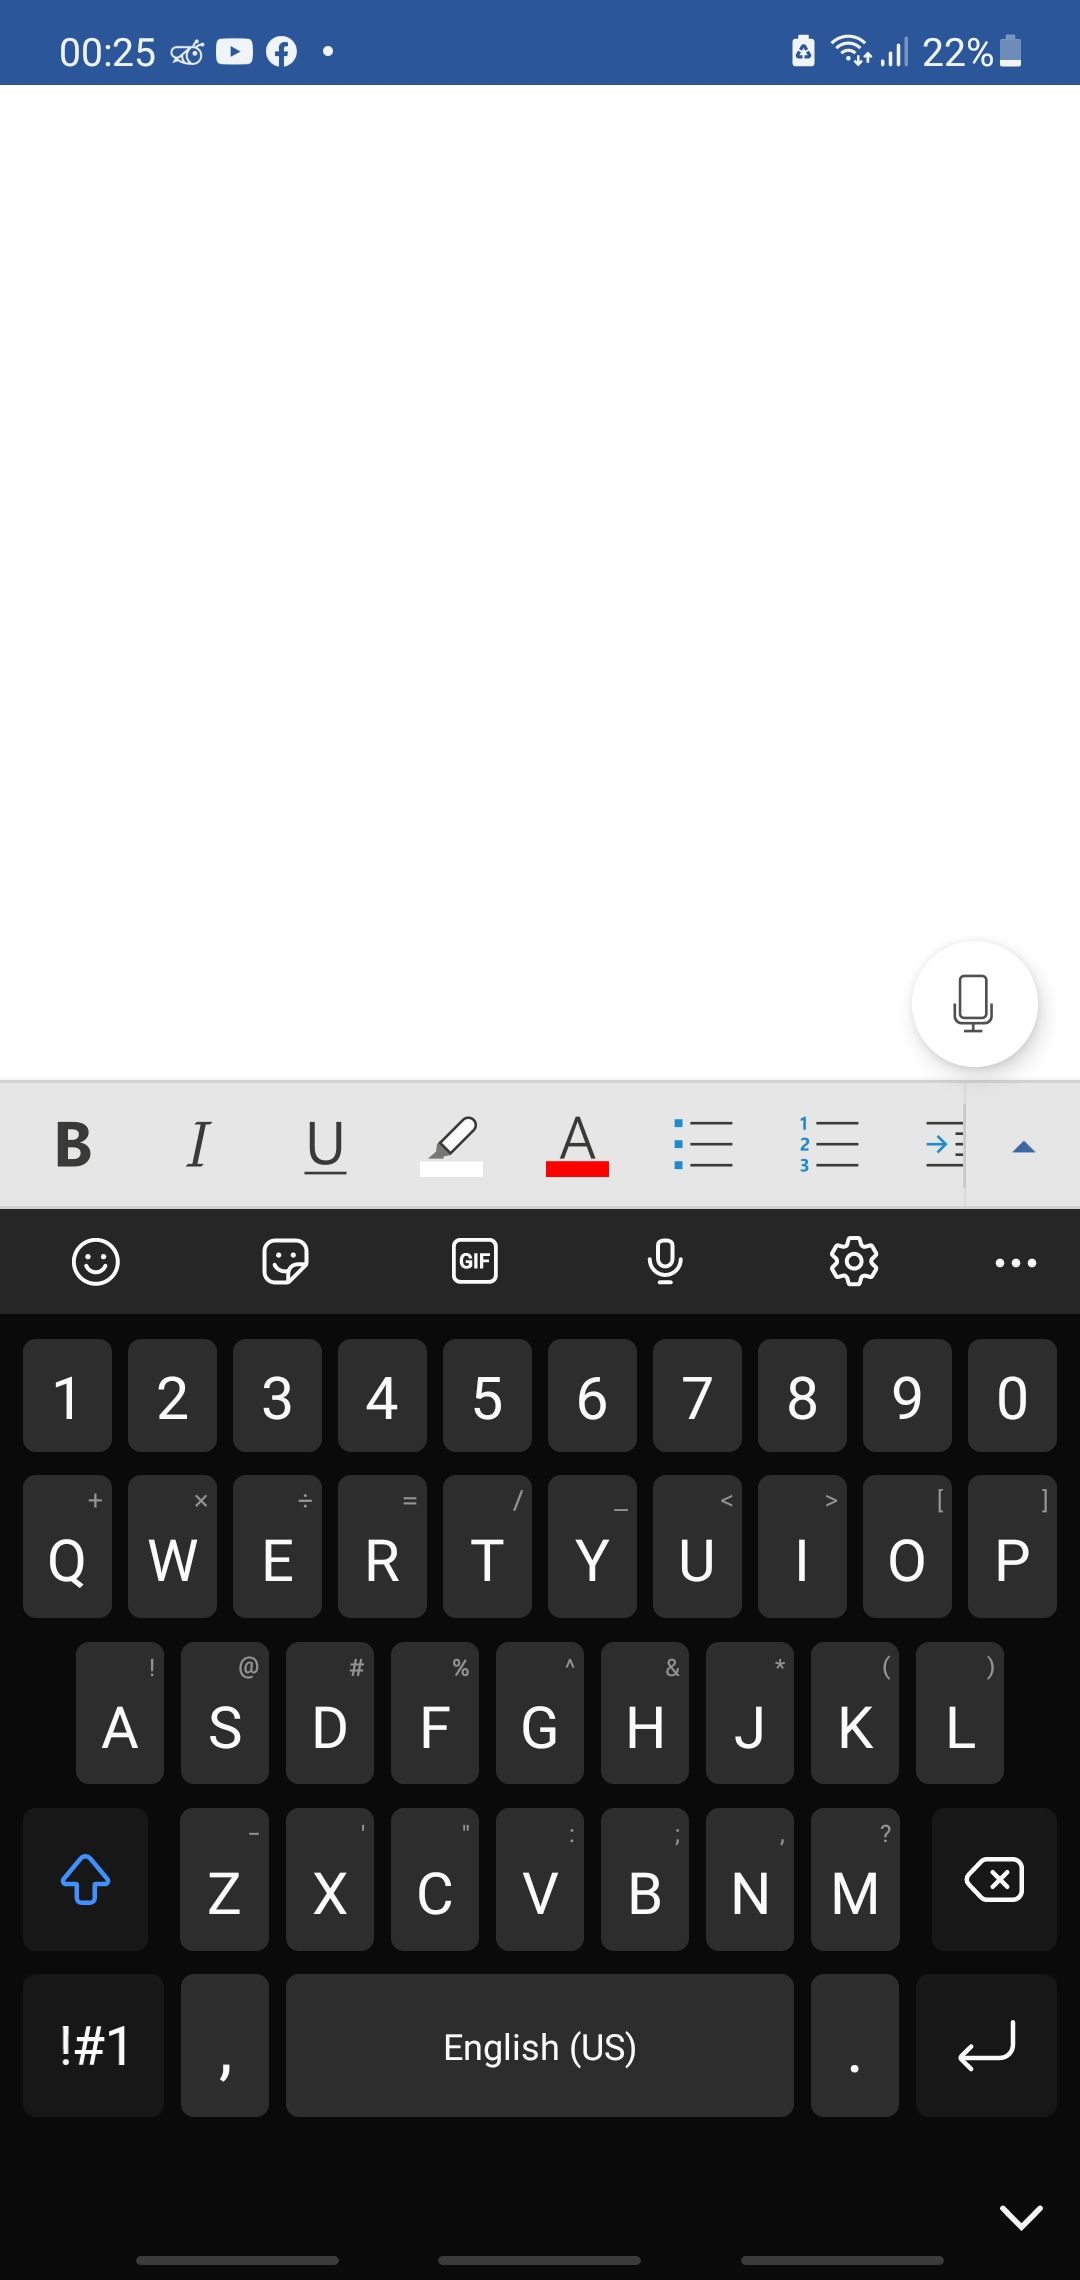 MS Word dictate screenshot on Android 11